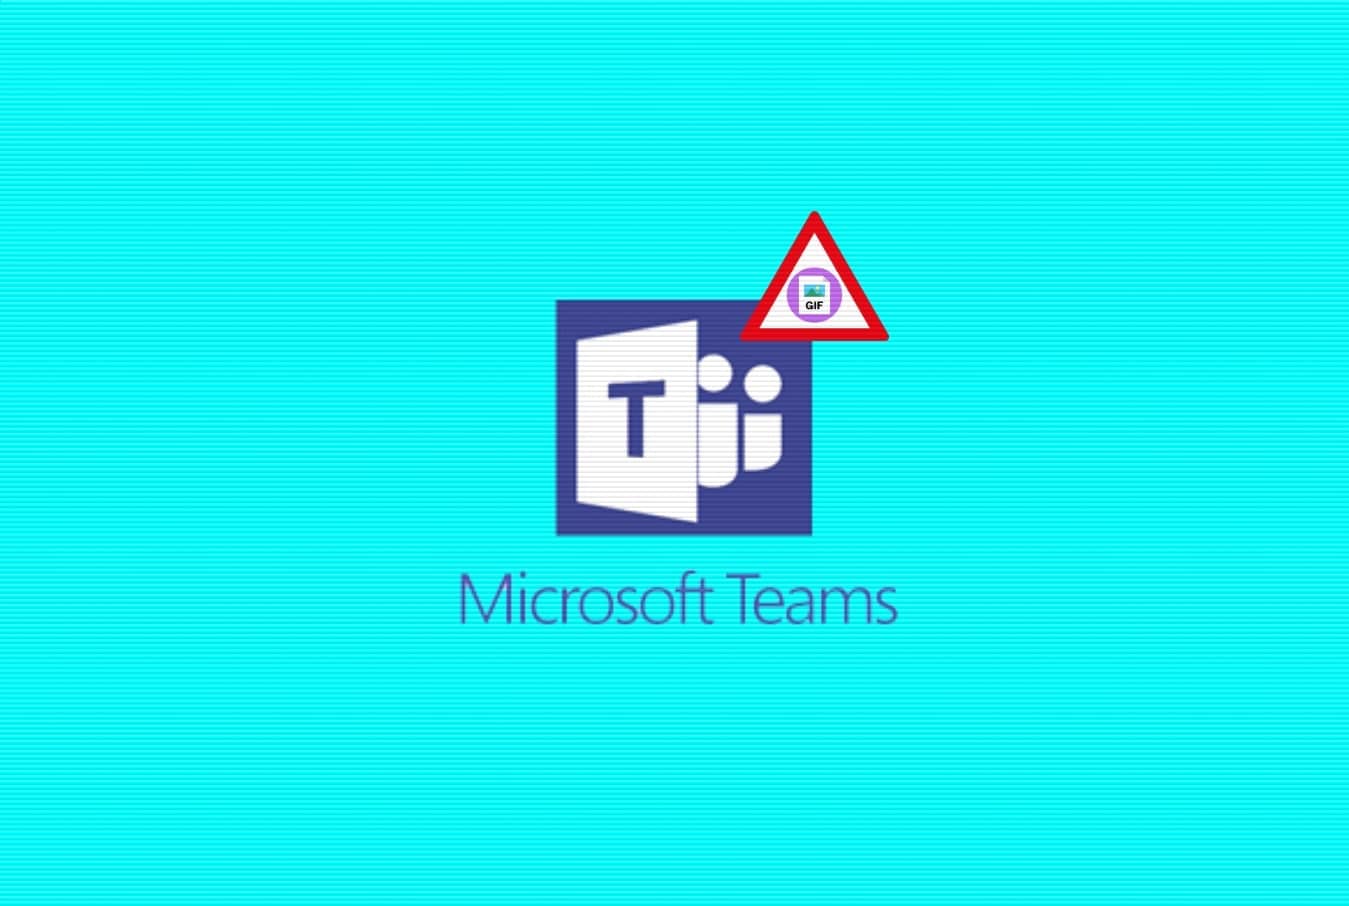 Vulnerability allowed hijacking of Microsoft Teams account with a GIF